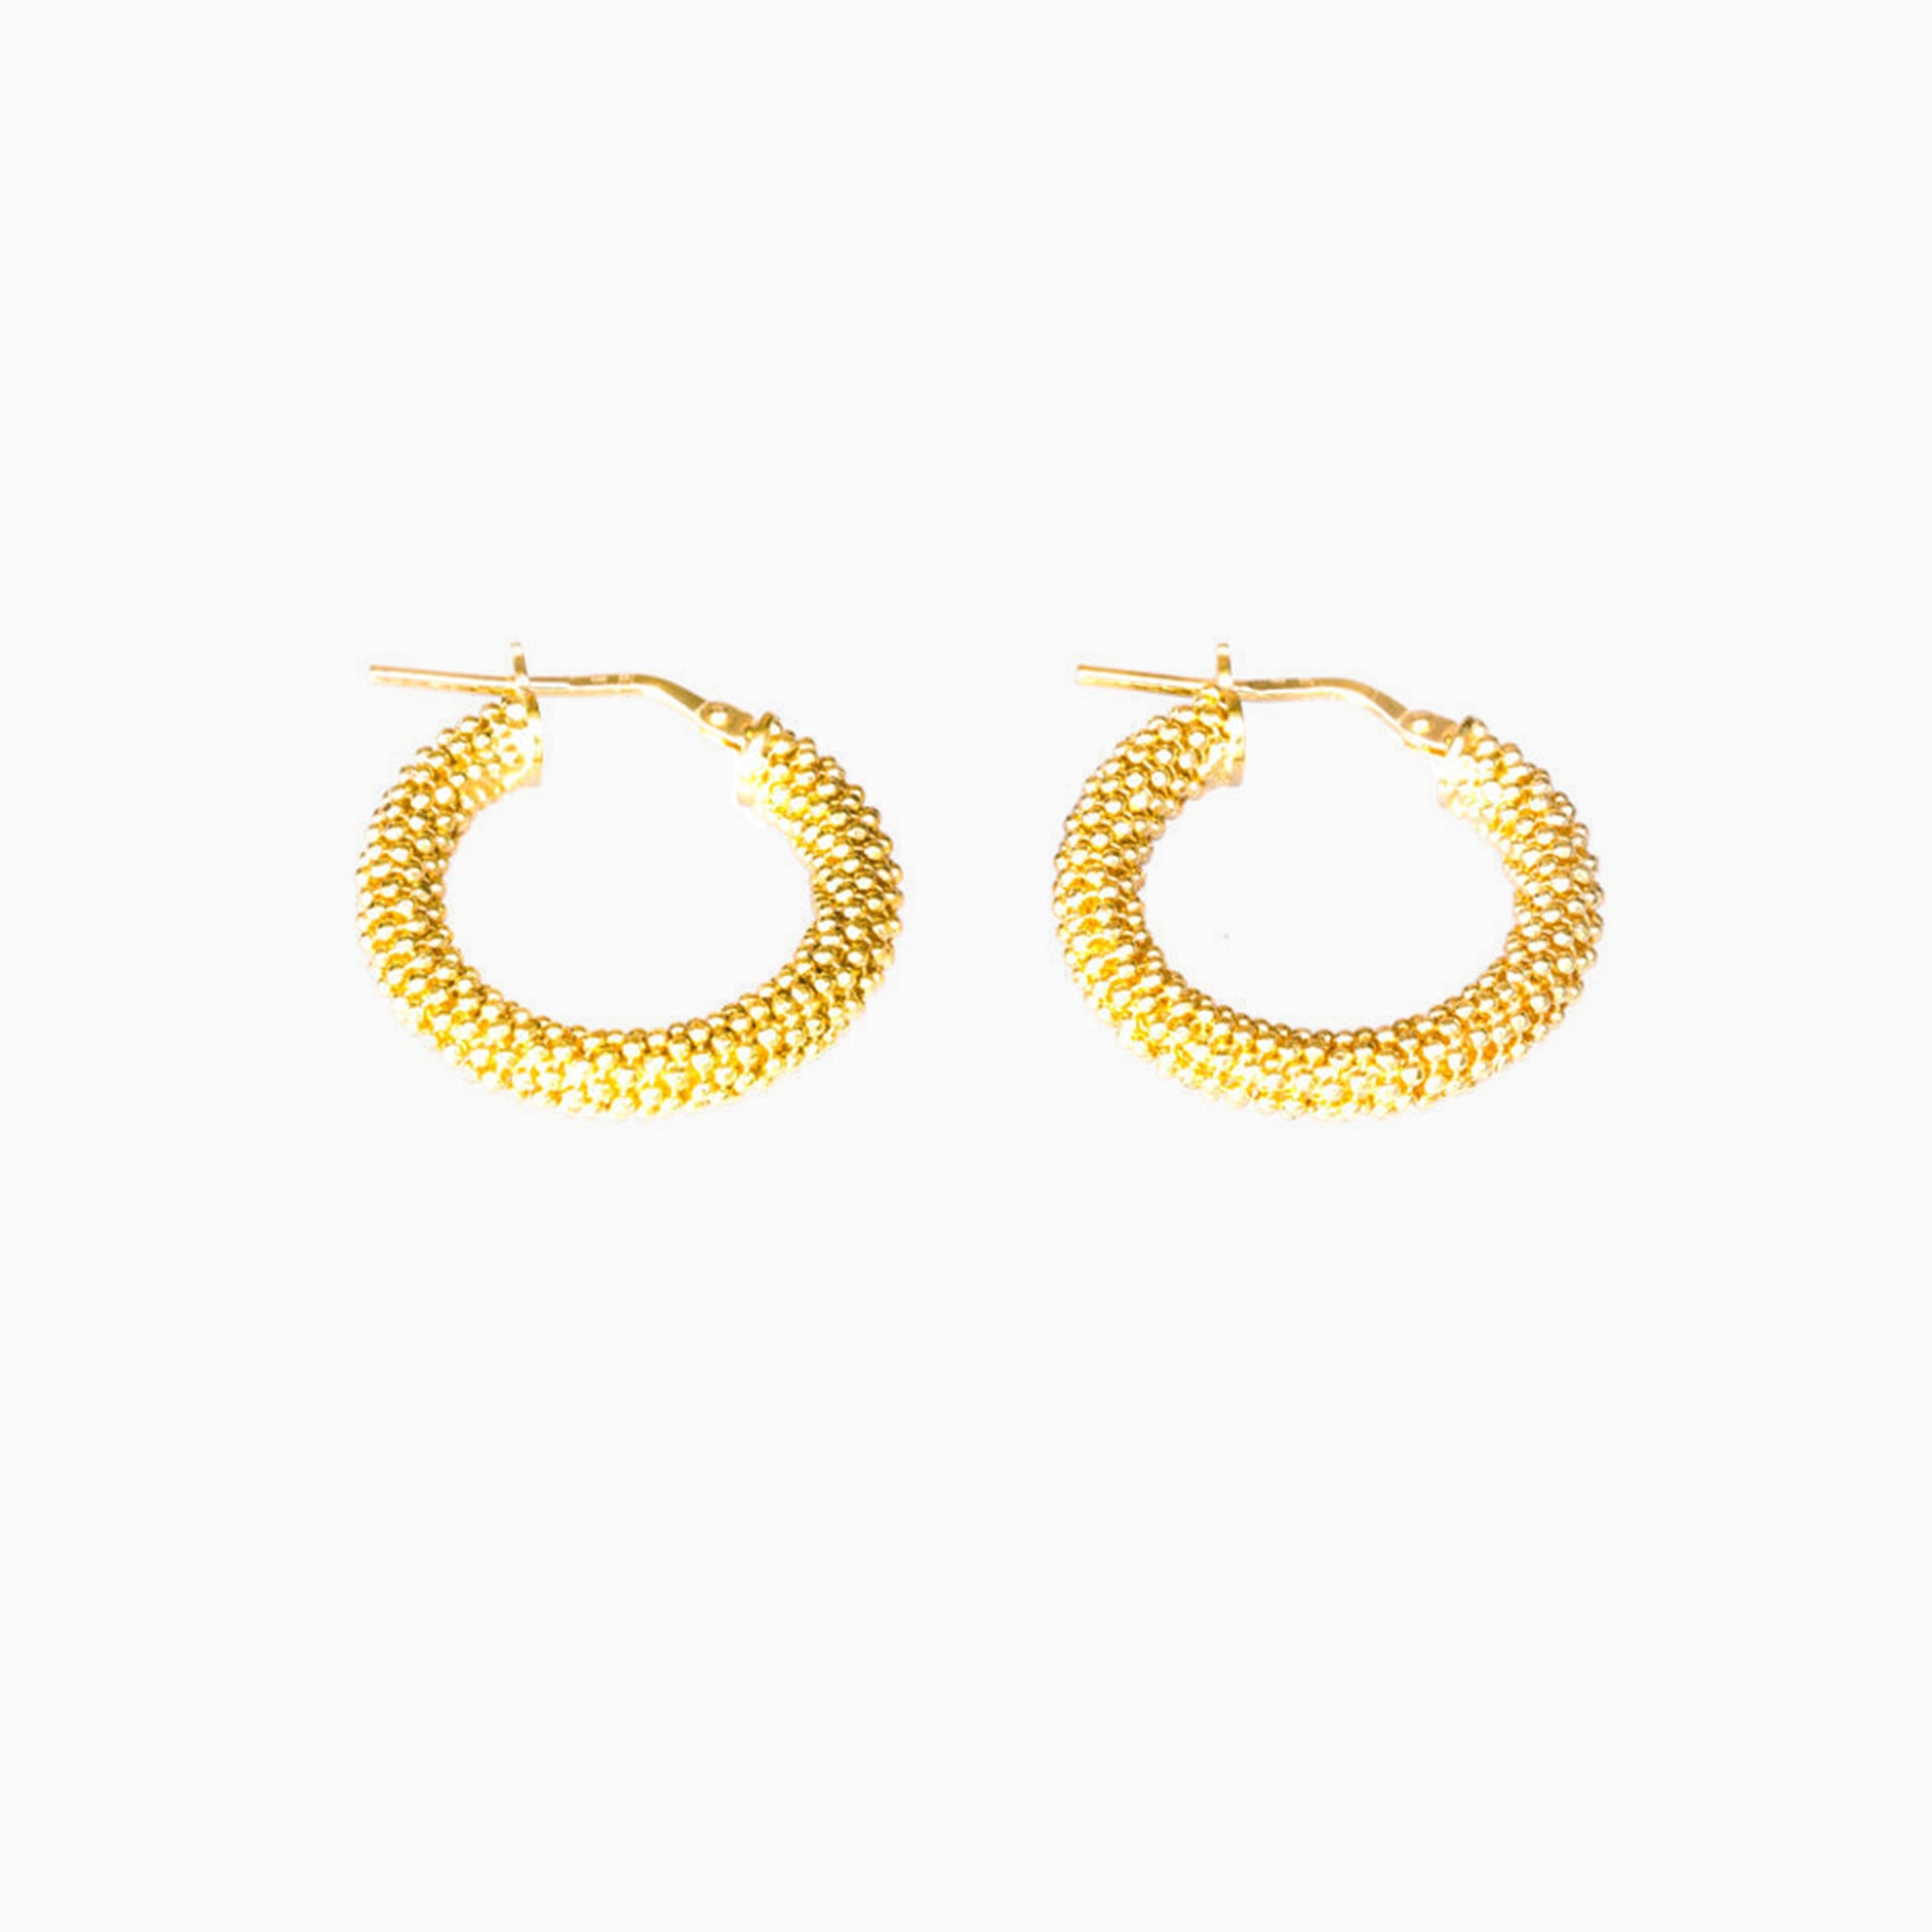 Yellow Gold Plated Mesh Earrings on a white background